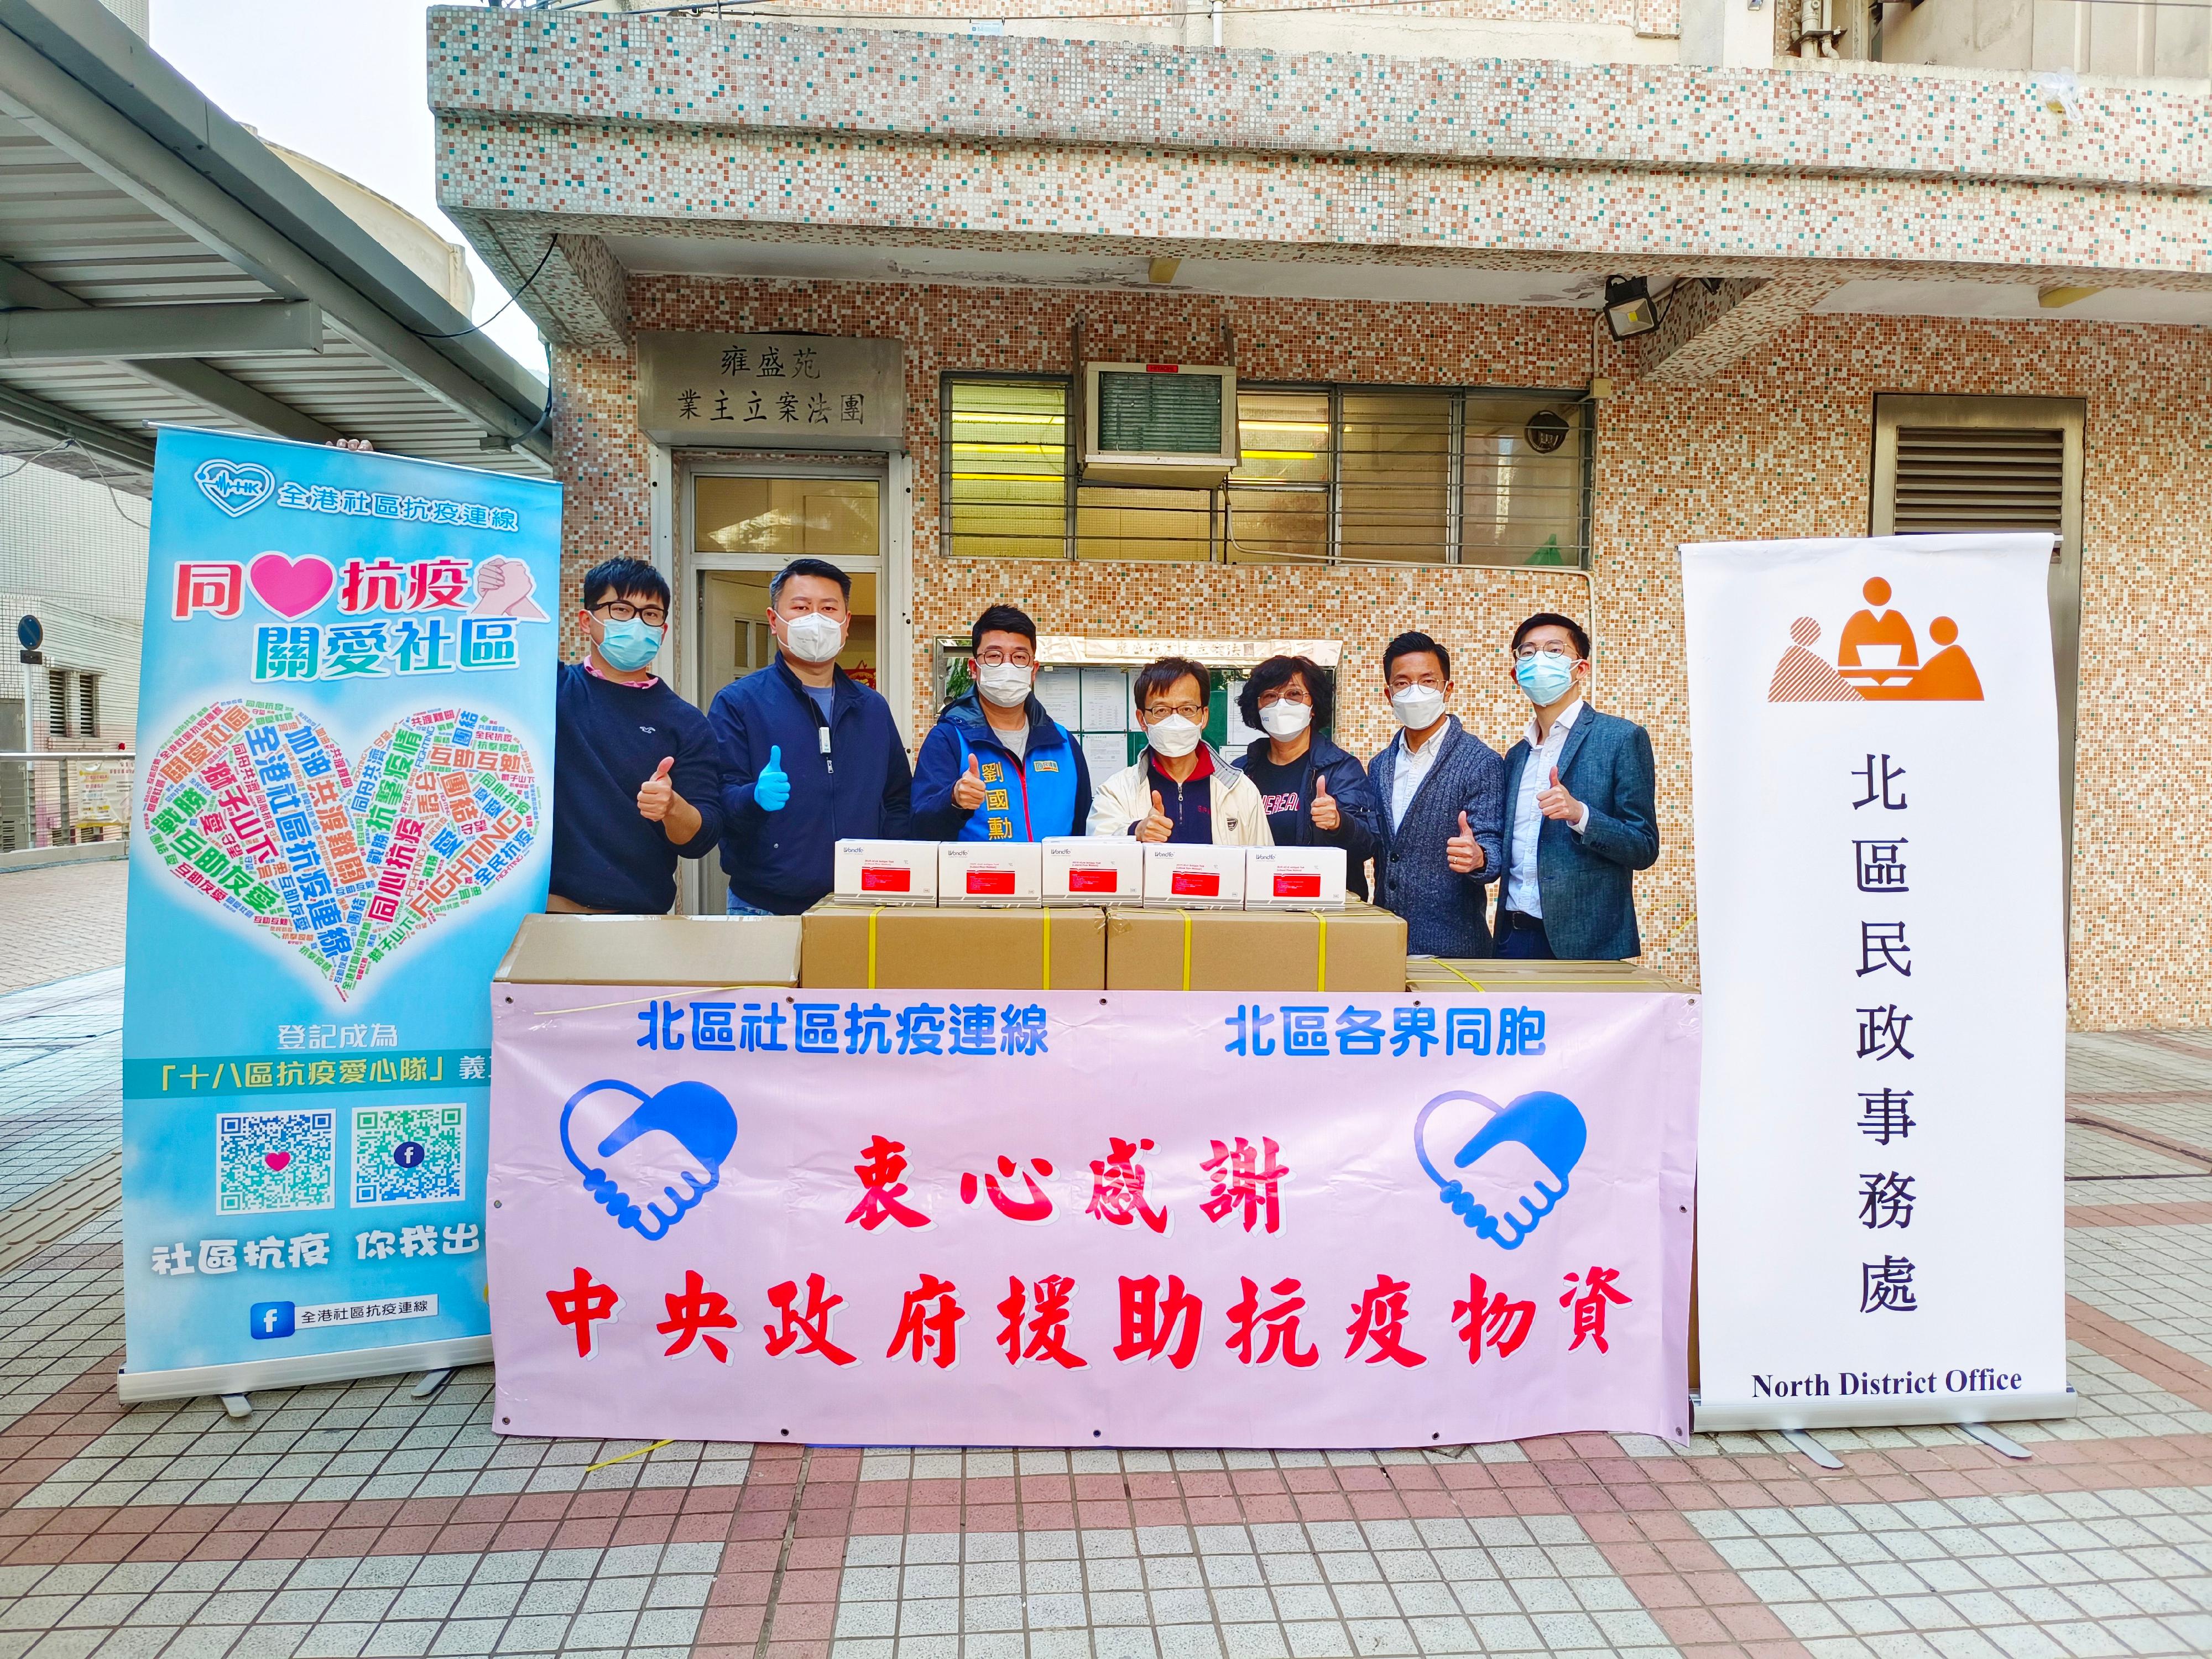 The North District Office, together with the Hong Kong Community Anti-Coronavirus Link, distributed rapid test kits to households in Noble Hill, Tin Ping Estate and Yung Shing Court through property management companies, owners' corporations and the residents welfare association in the district on February 27.